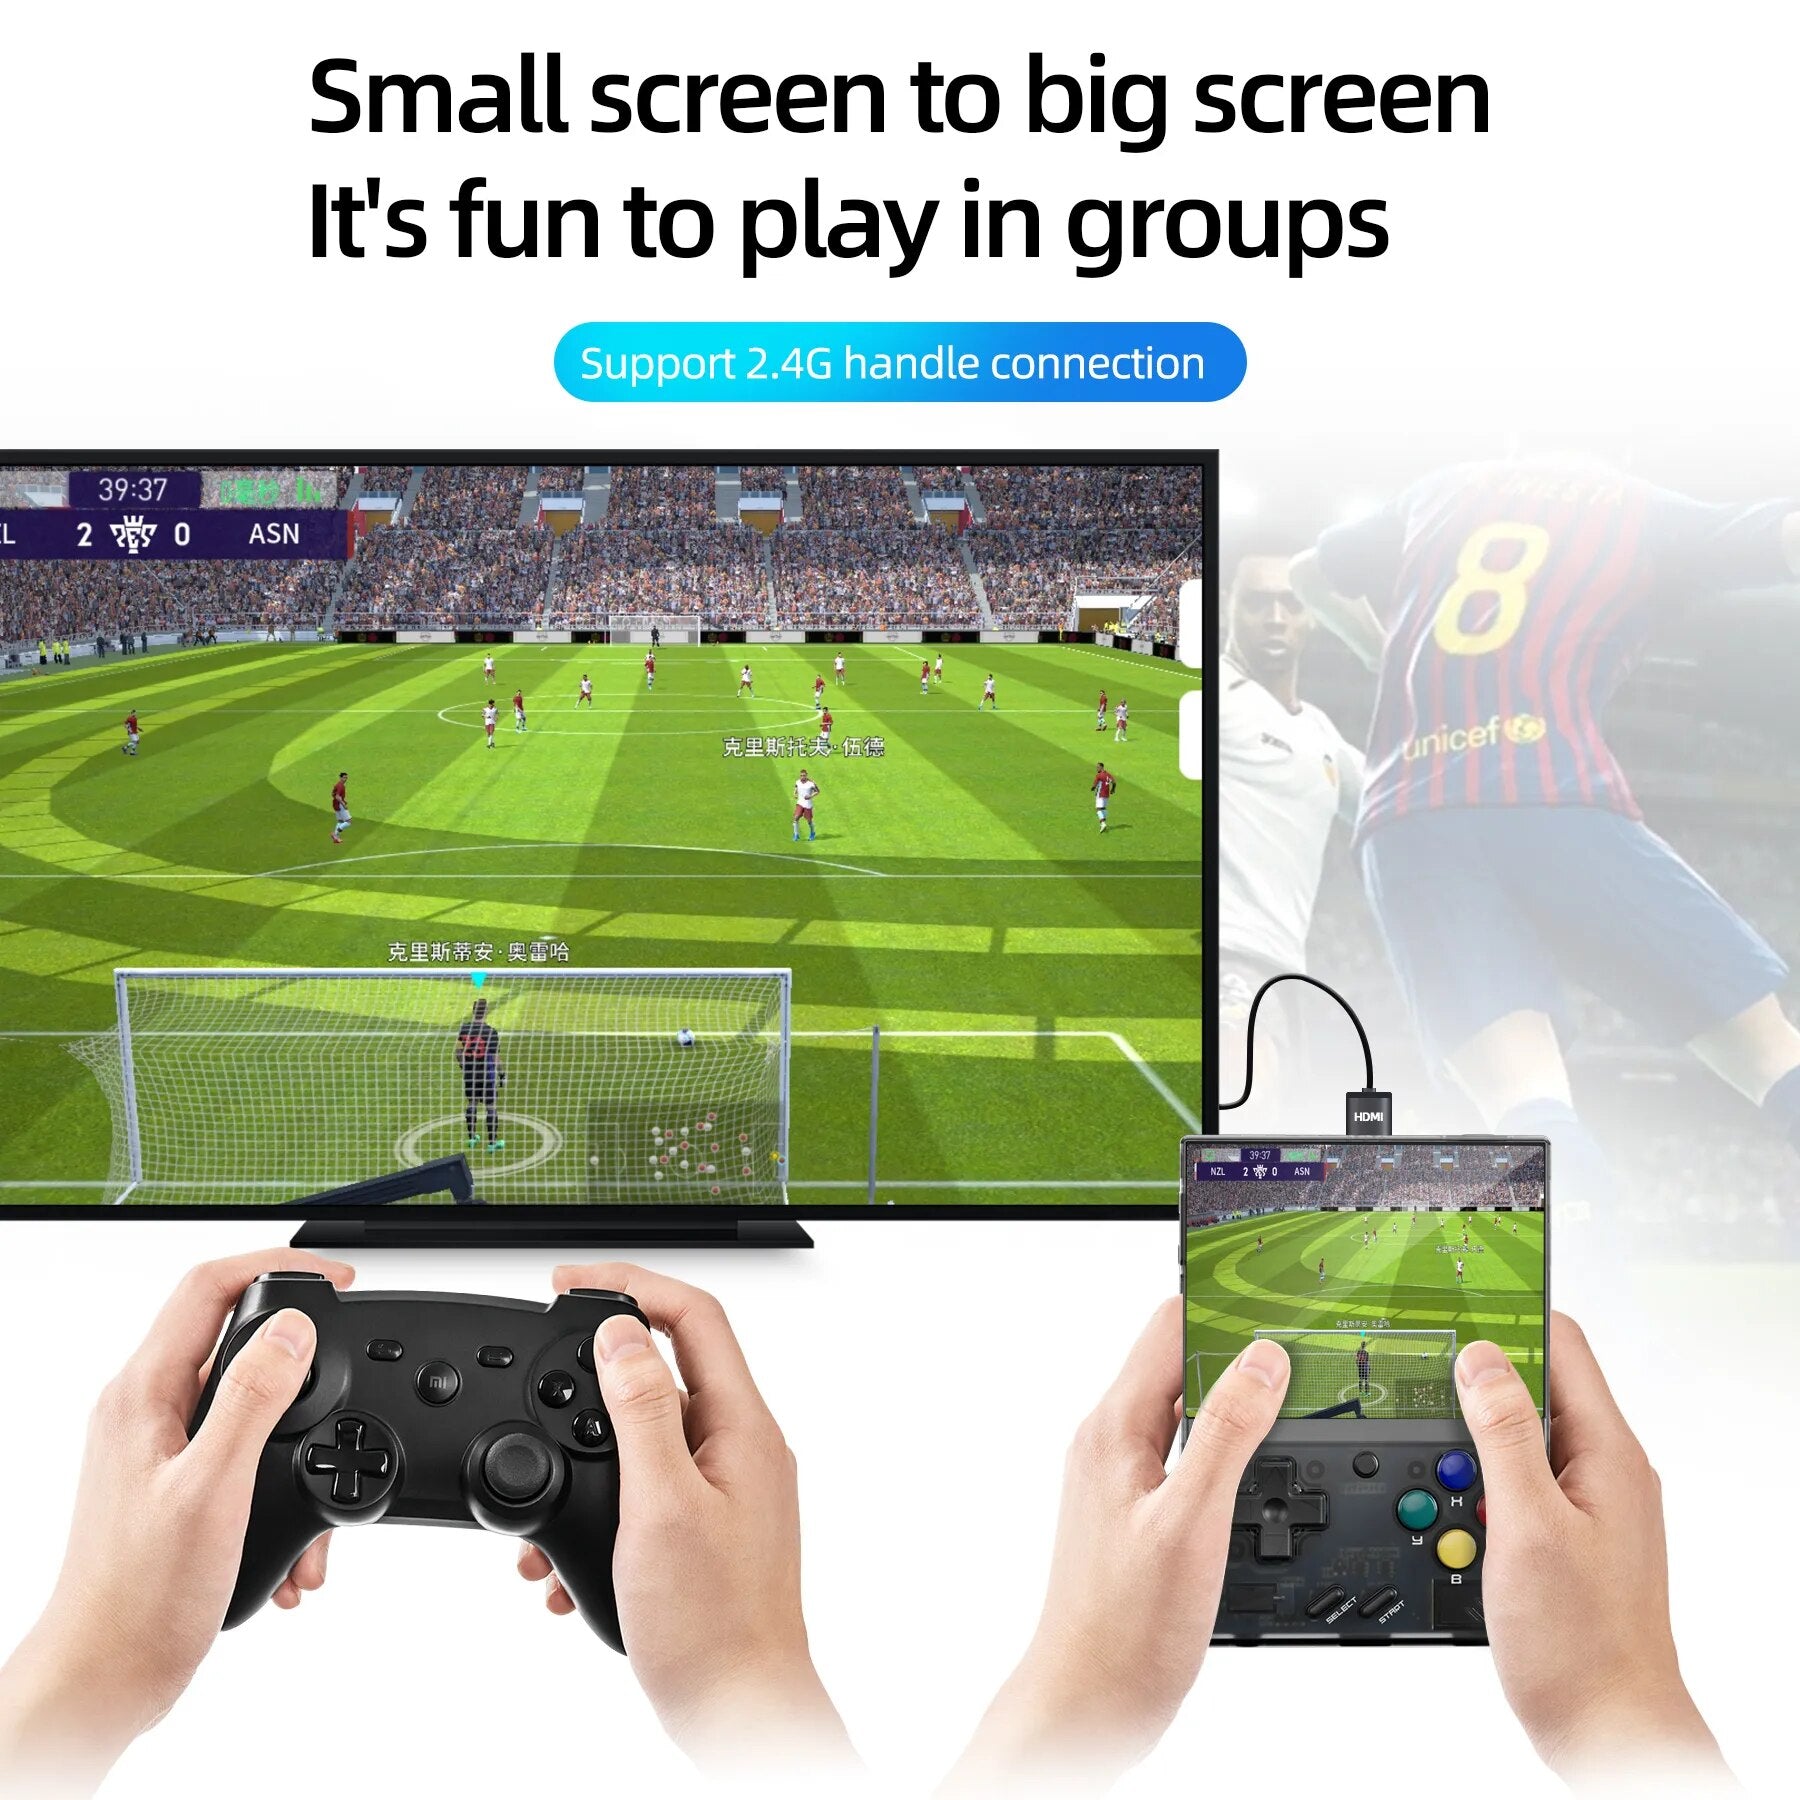 MIYOO Mini Plus 3.5-inch IPS HD Screen Handheld Game Console Linux System 35000+ Games MIYOO MINI+Retro Console For PS/SFC/MAME